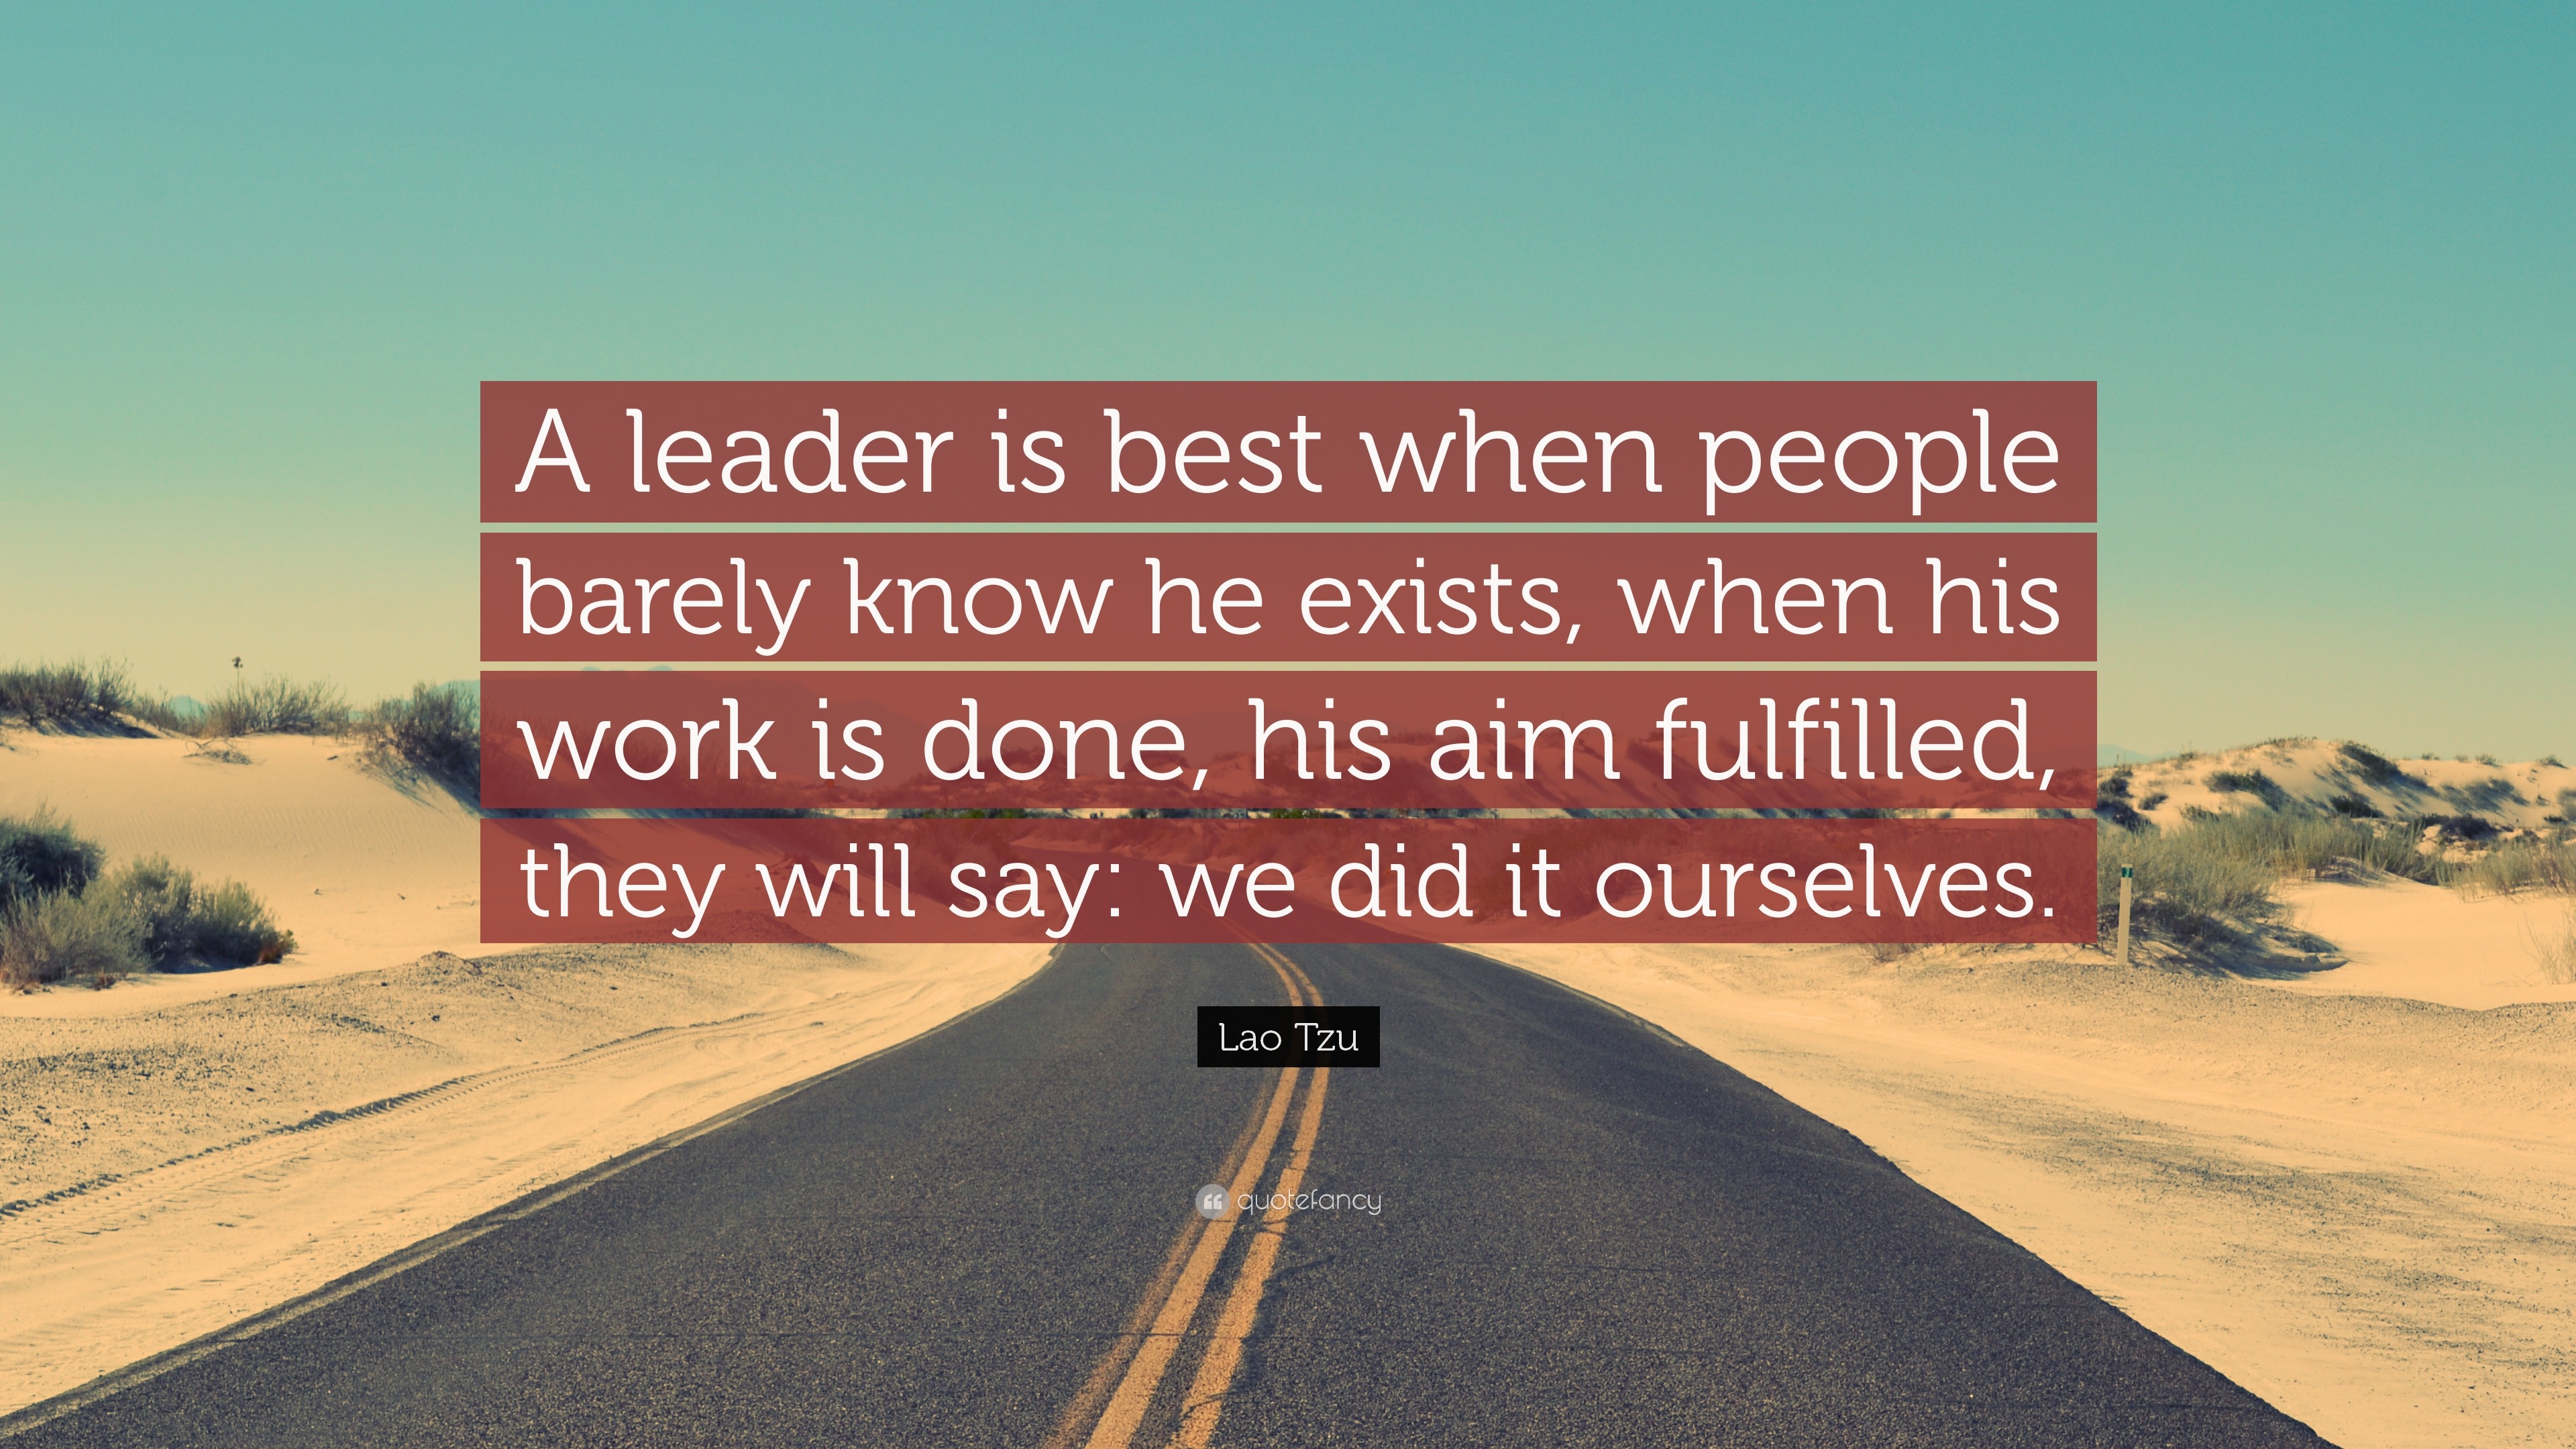 Image result for "A leader is best when people barely know he exists, when his work is done, his aim fulfilled, they will say: we did it ourselves." —Lao Tzu